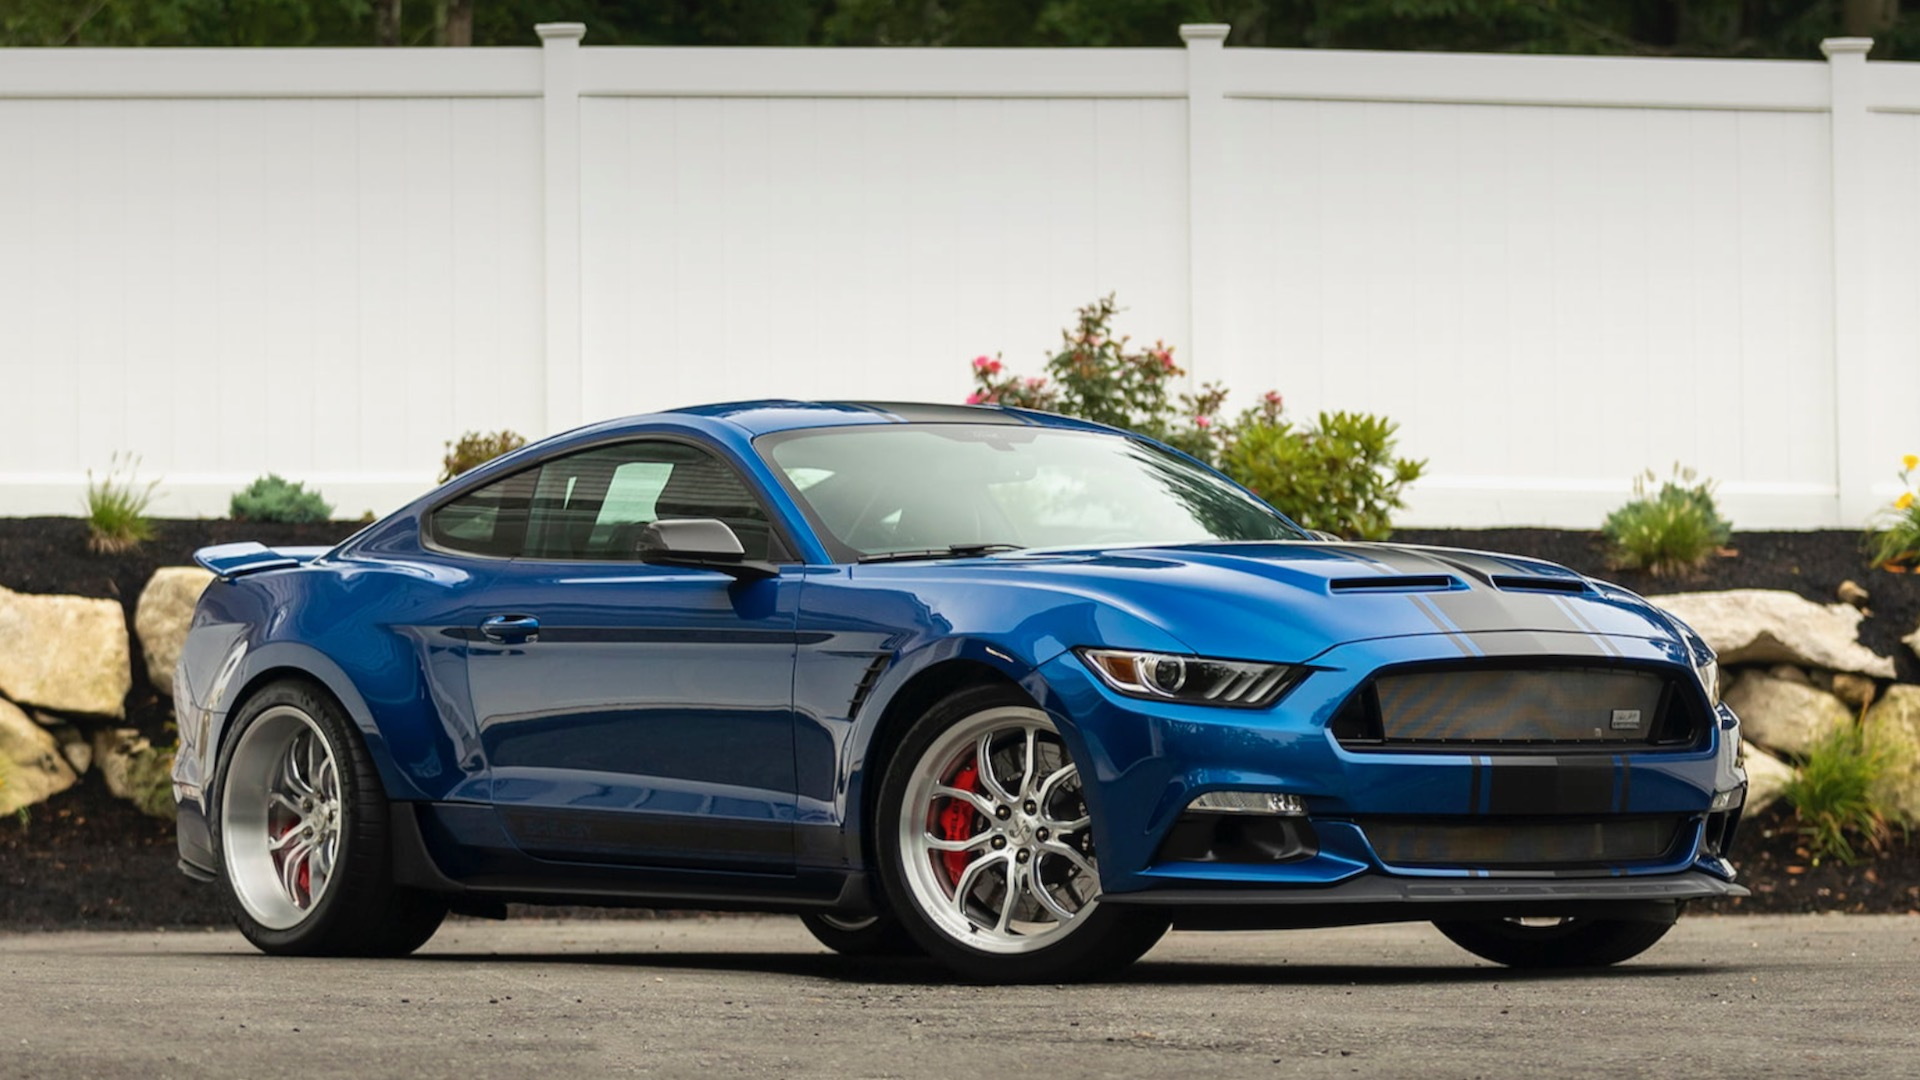 2017 Ford Mustang Shelby Super Snake Widebody concept (photo via Mecum Auctions)